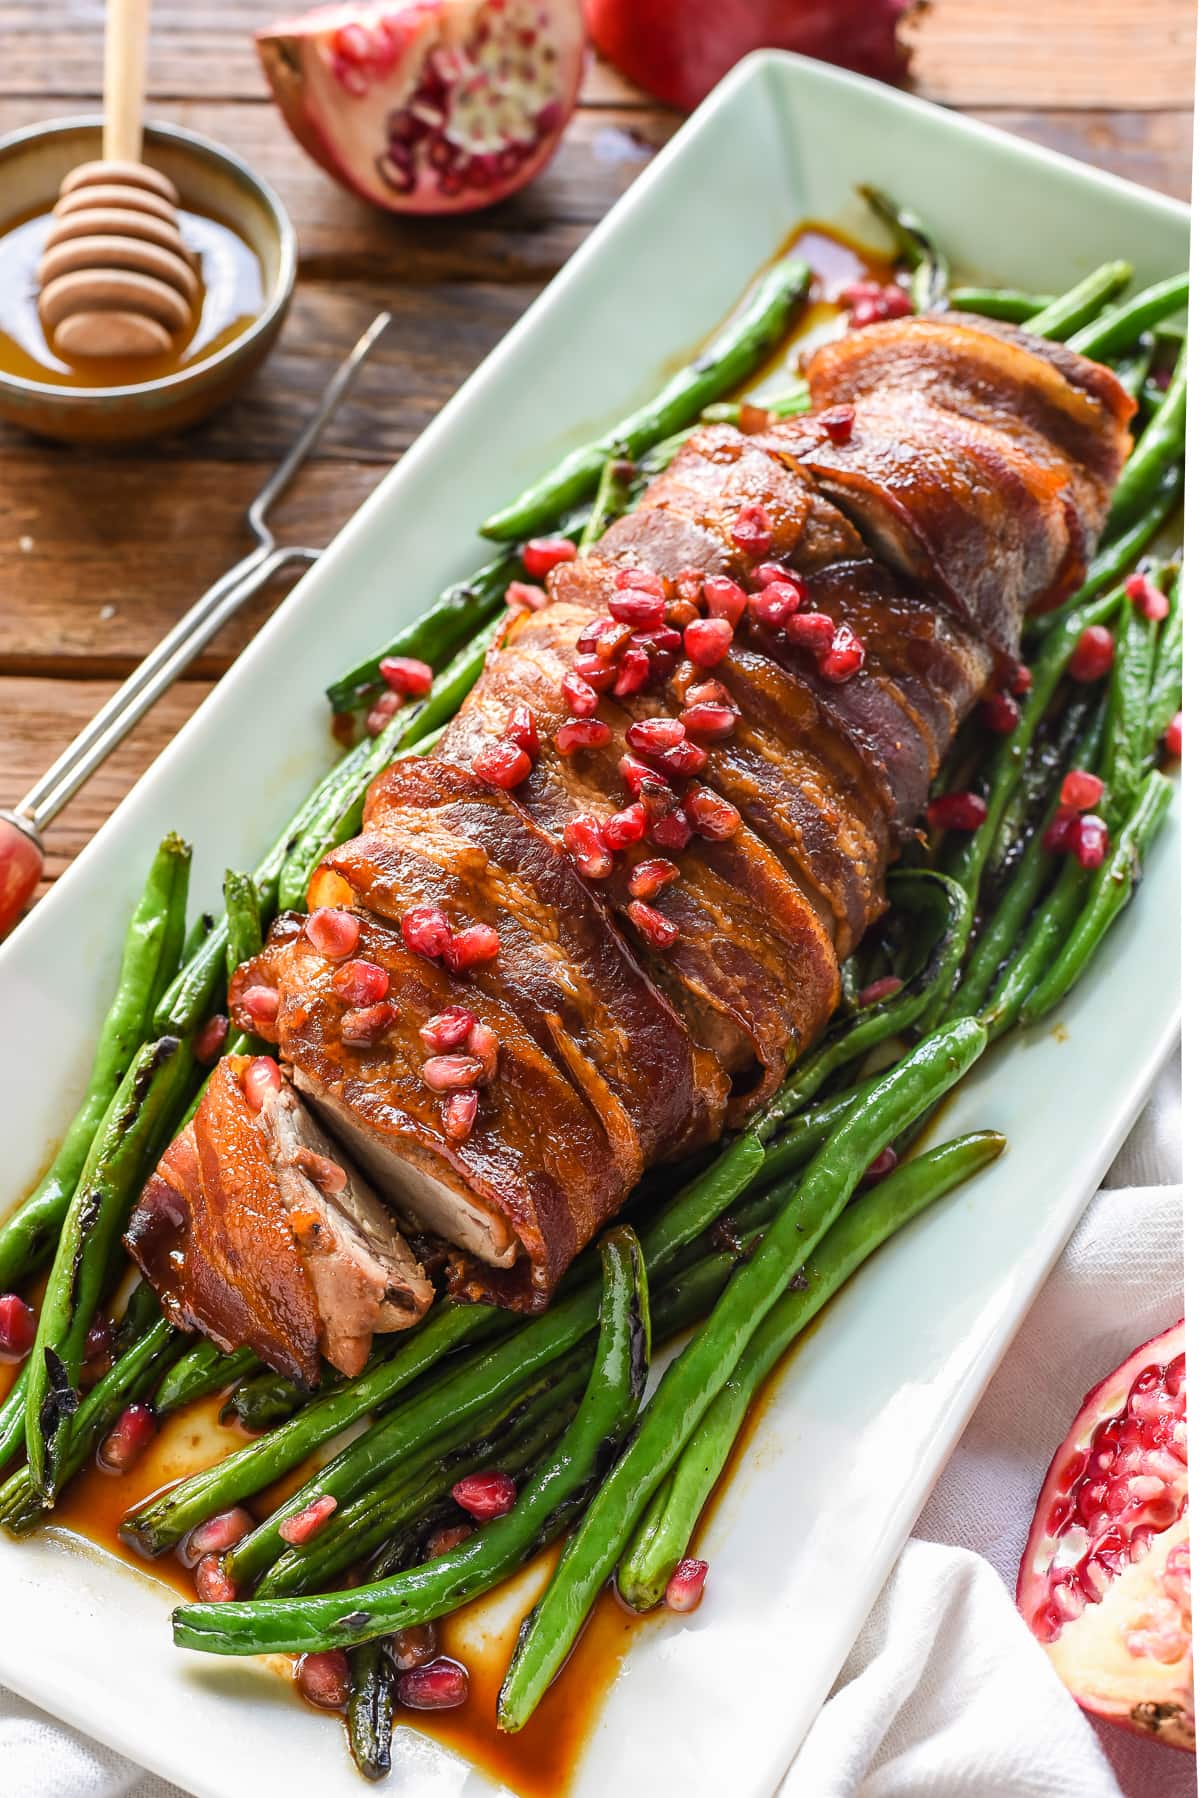 This Bacon Wrapped Pork Tenderloin with a Honey Pomegranate Glaze is a super easy and festive meal for the holidays.